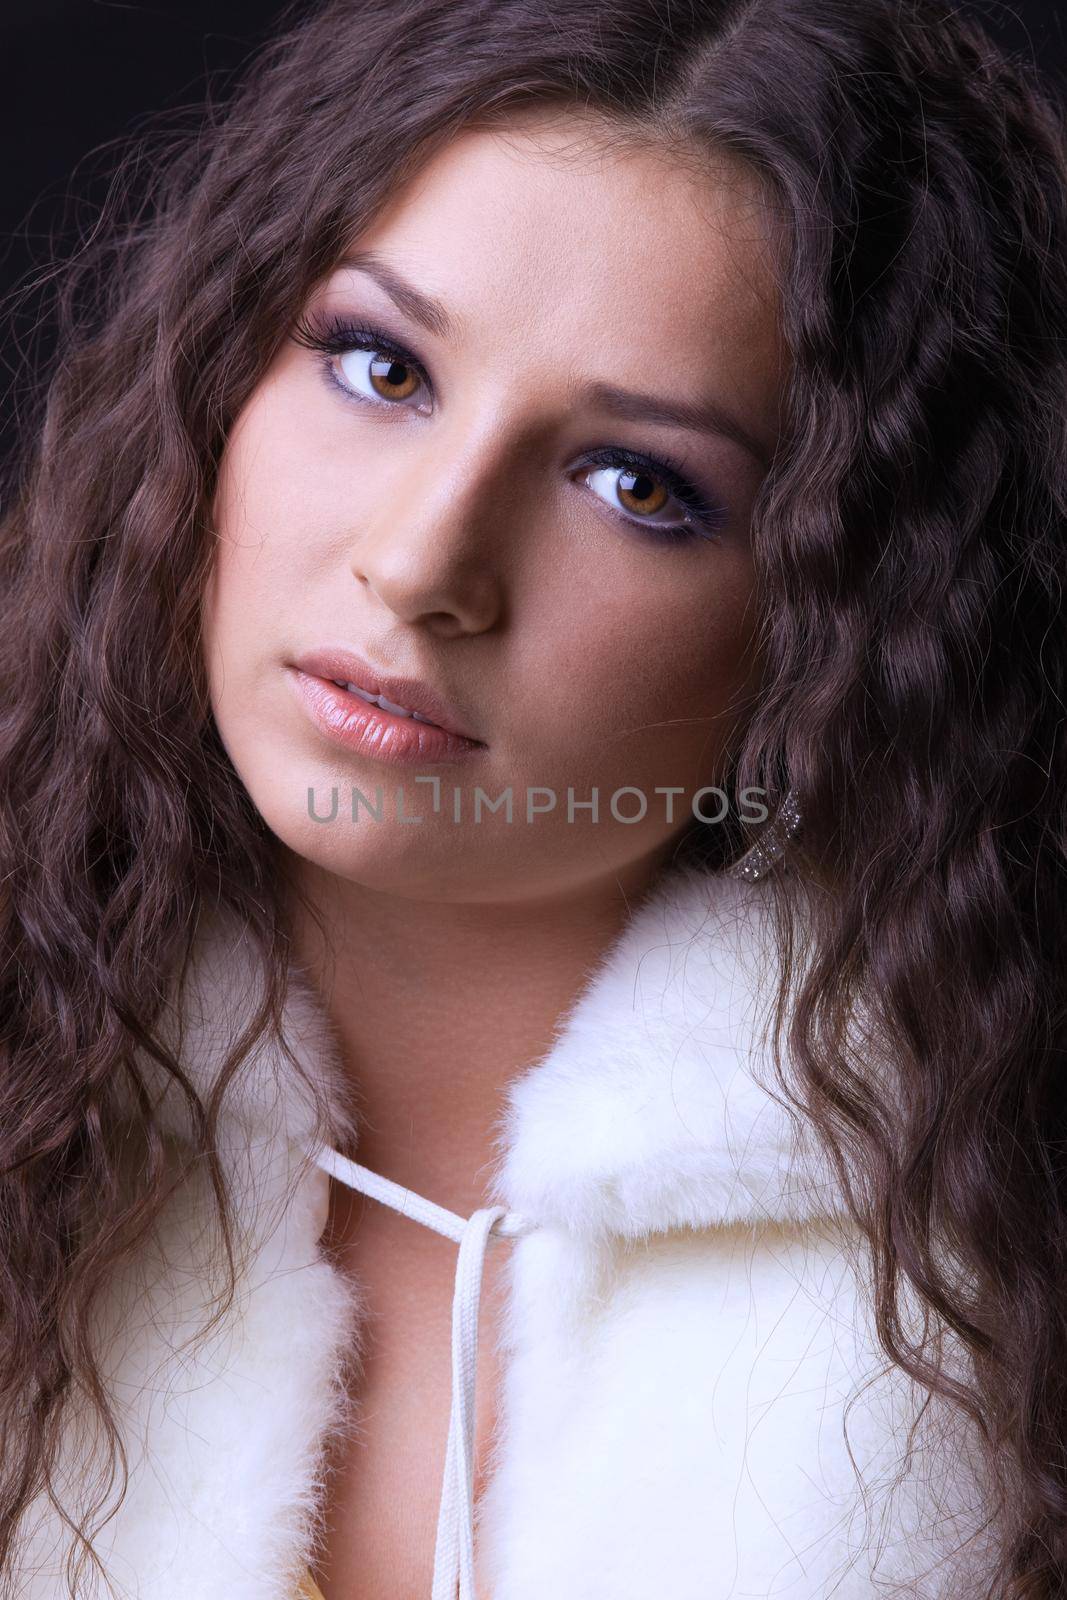 Young beauty girl close-up portrait in white fur coat